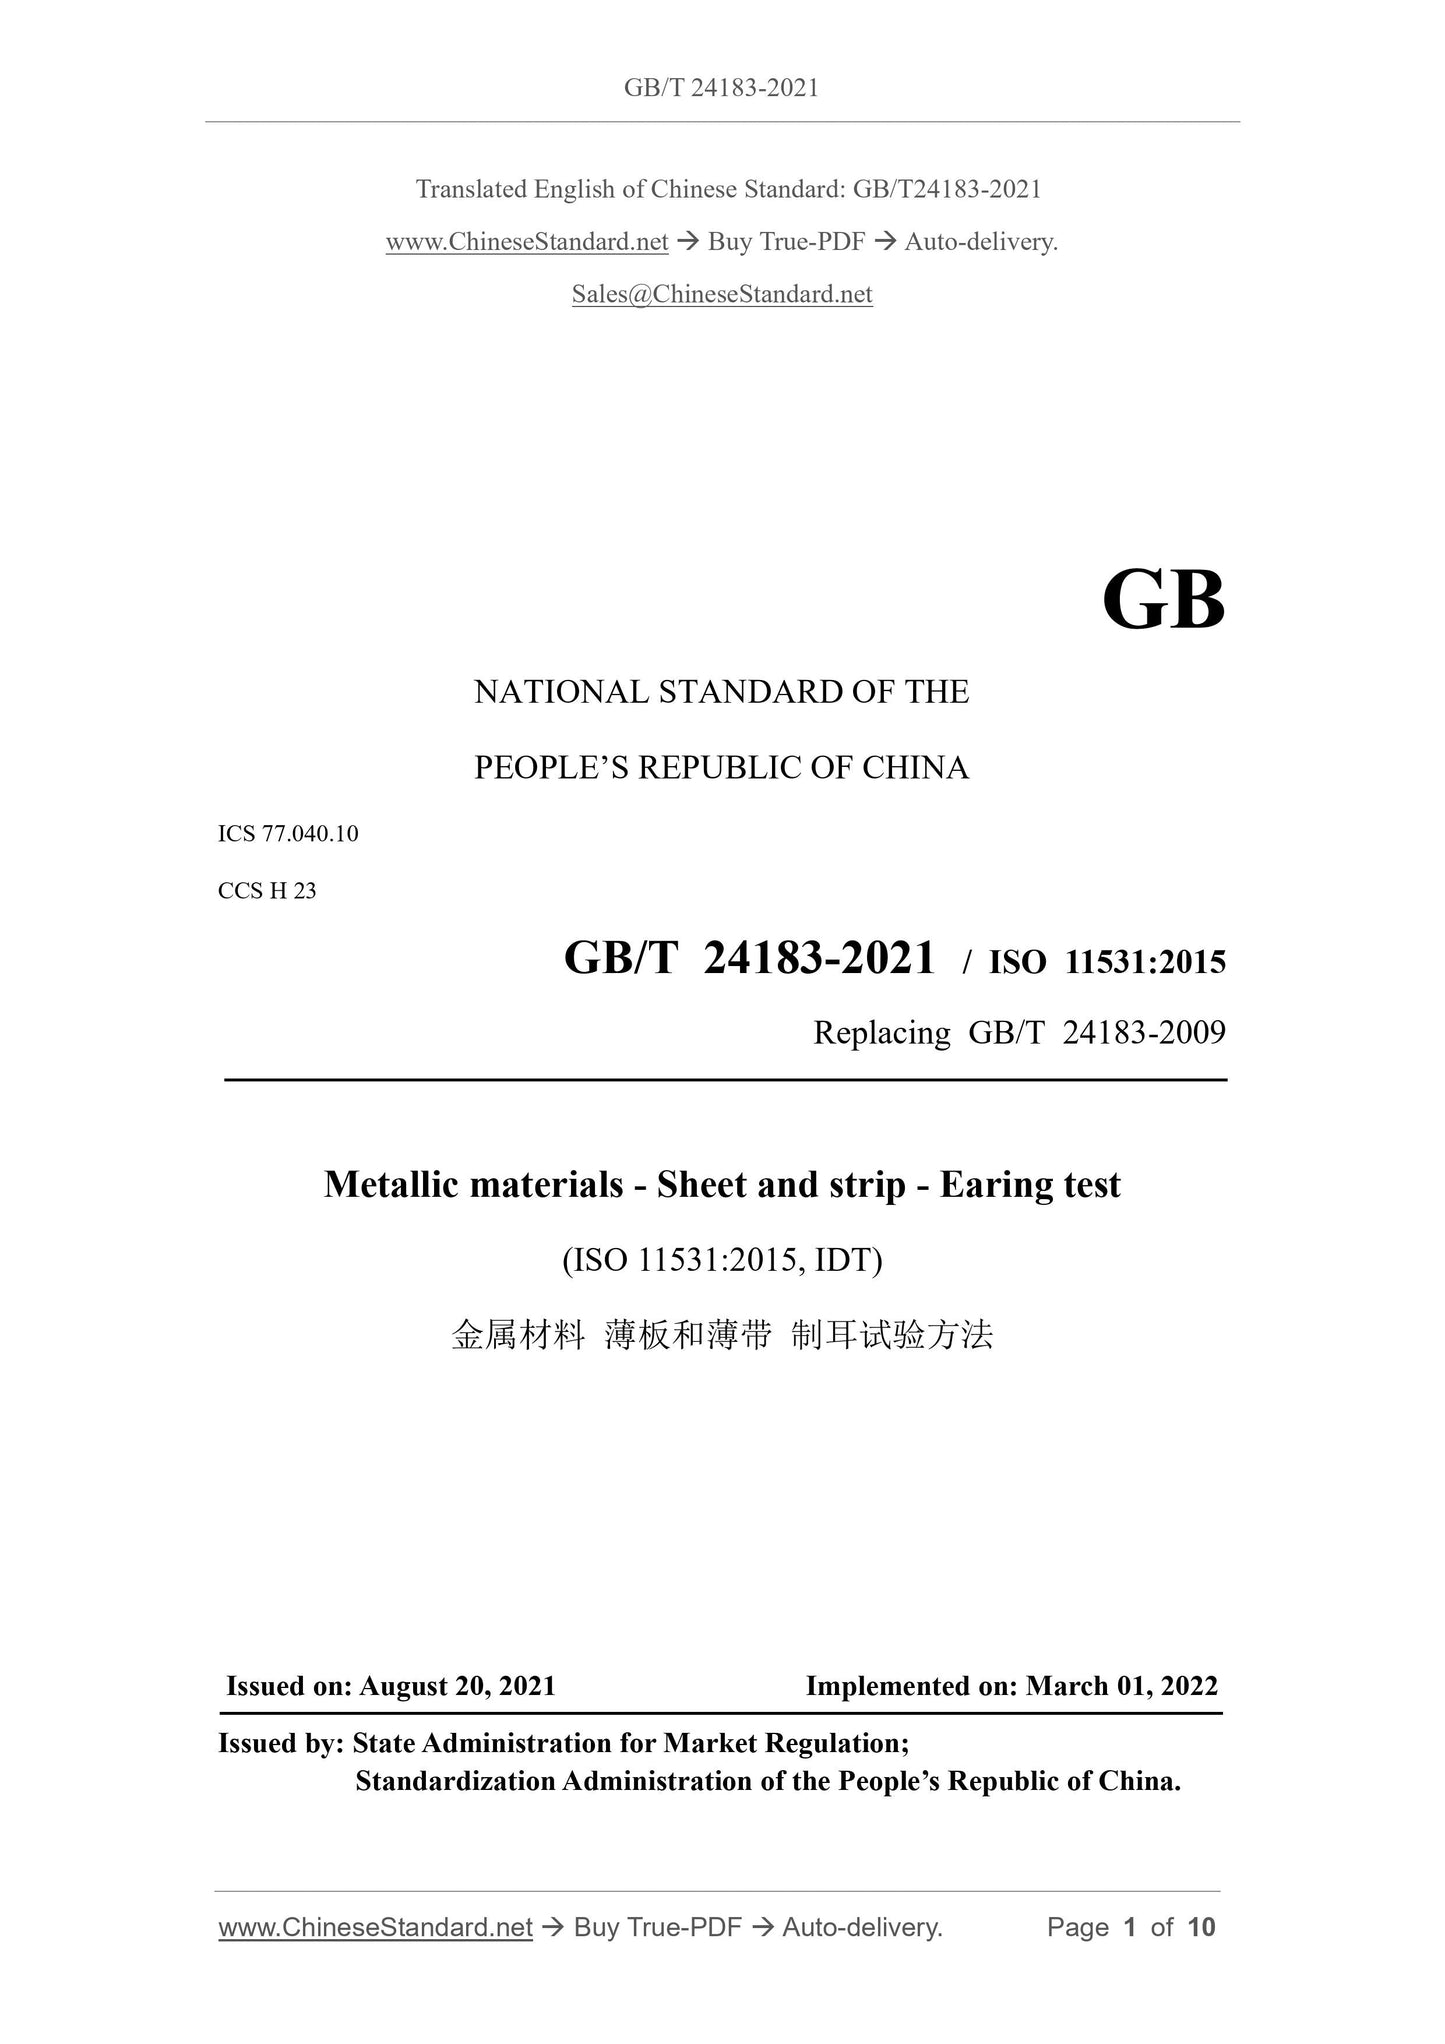 GB/T 24183-2021 Page 1